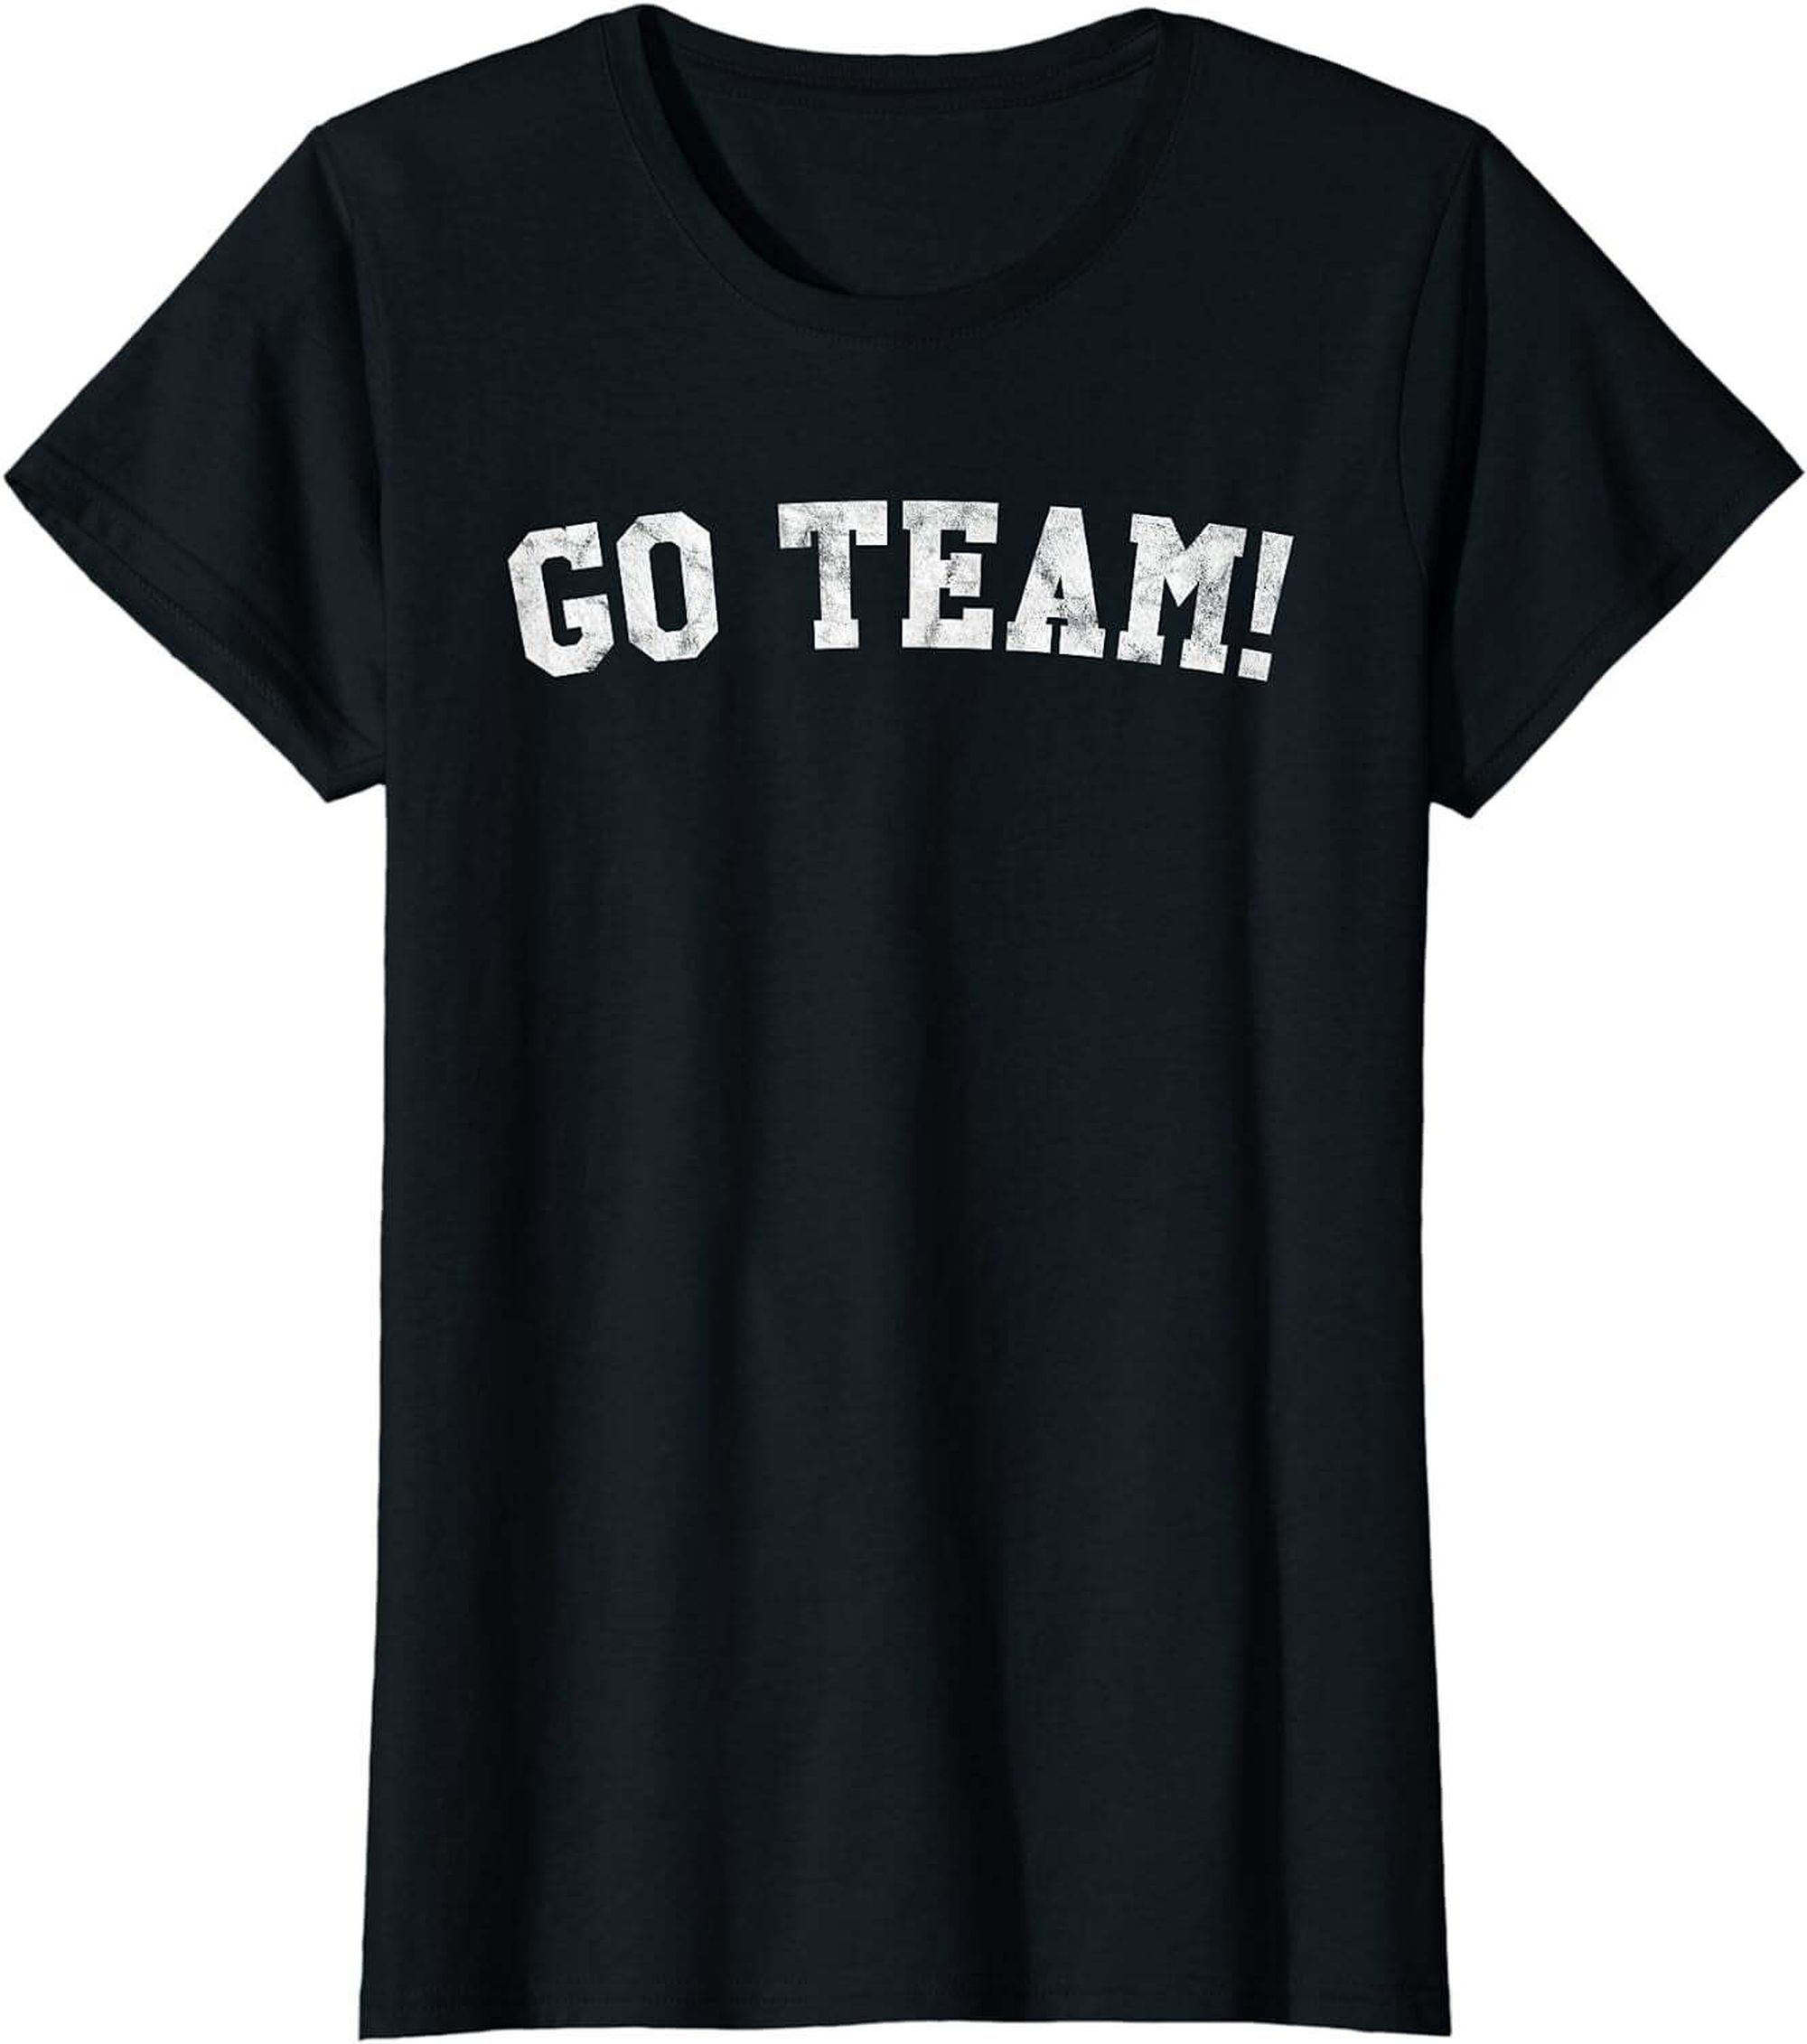 Unite and Ignite: Elevate Team Spirit with Our Dynamic Rally T-Shirts ...